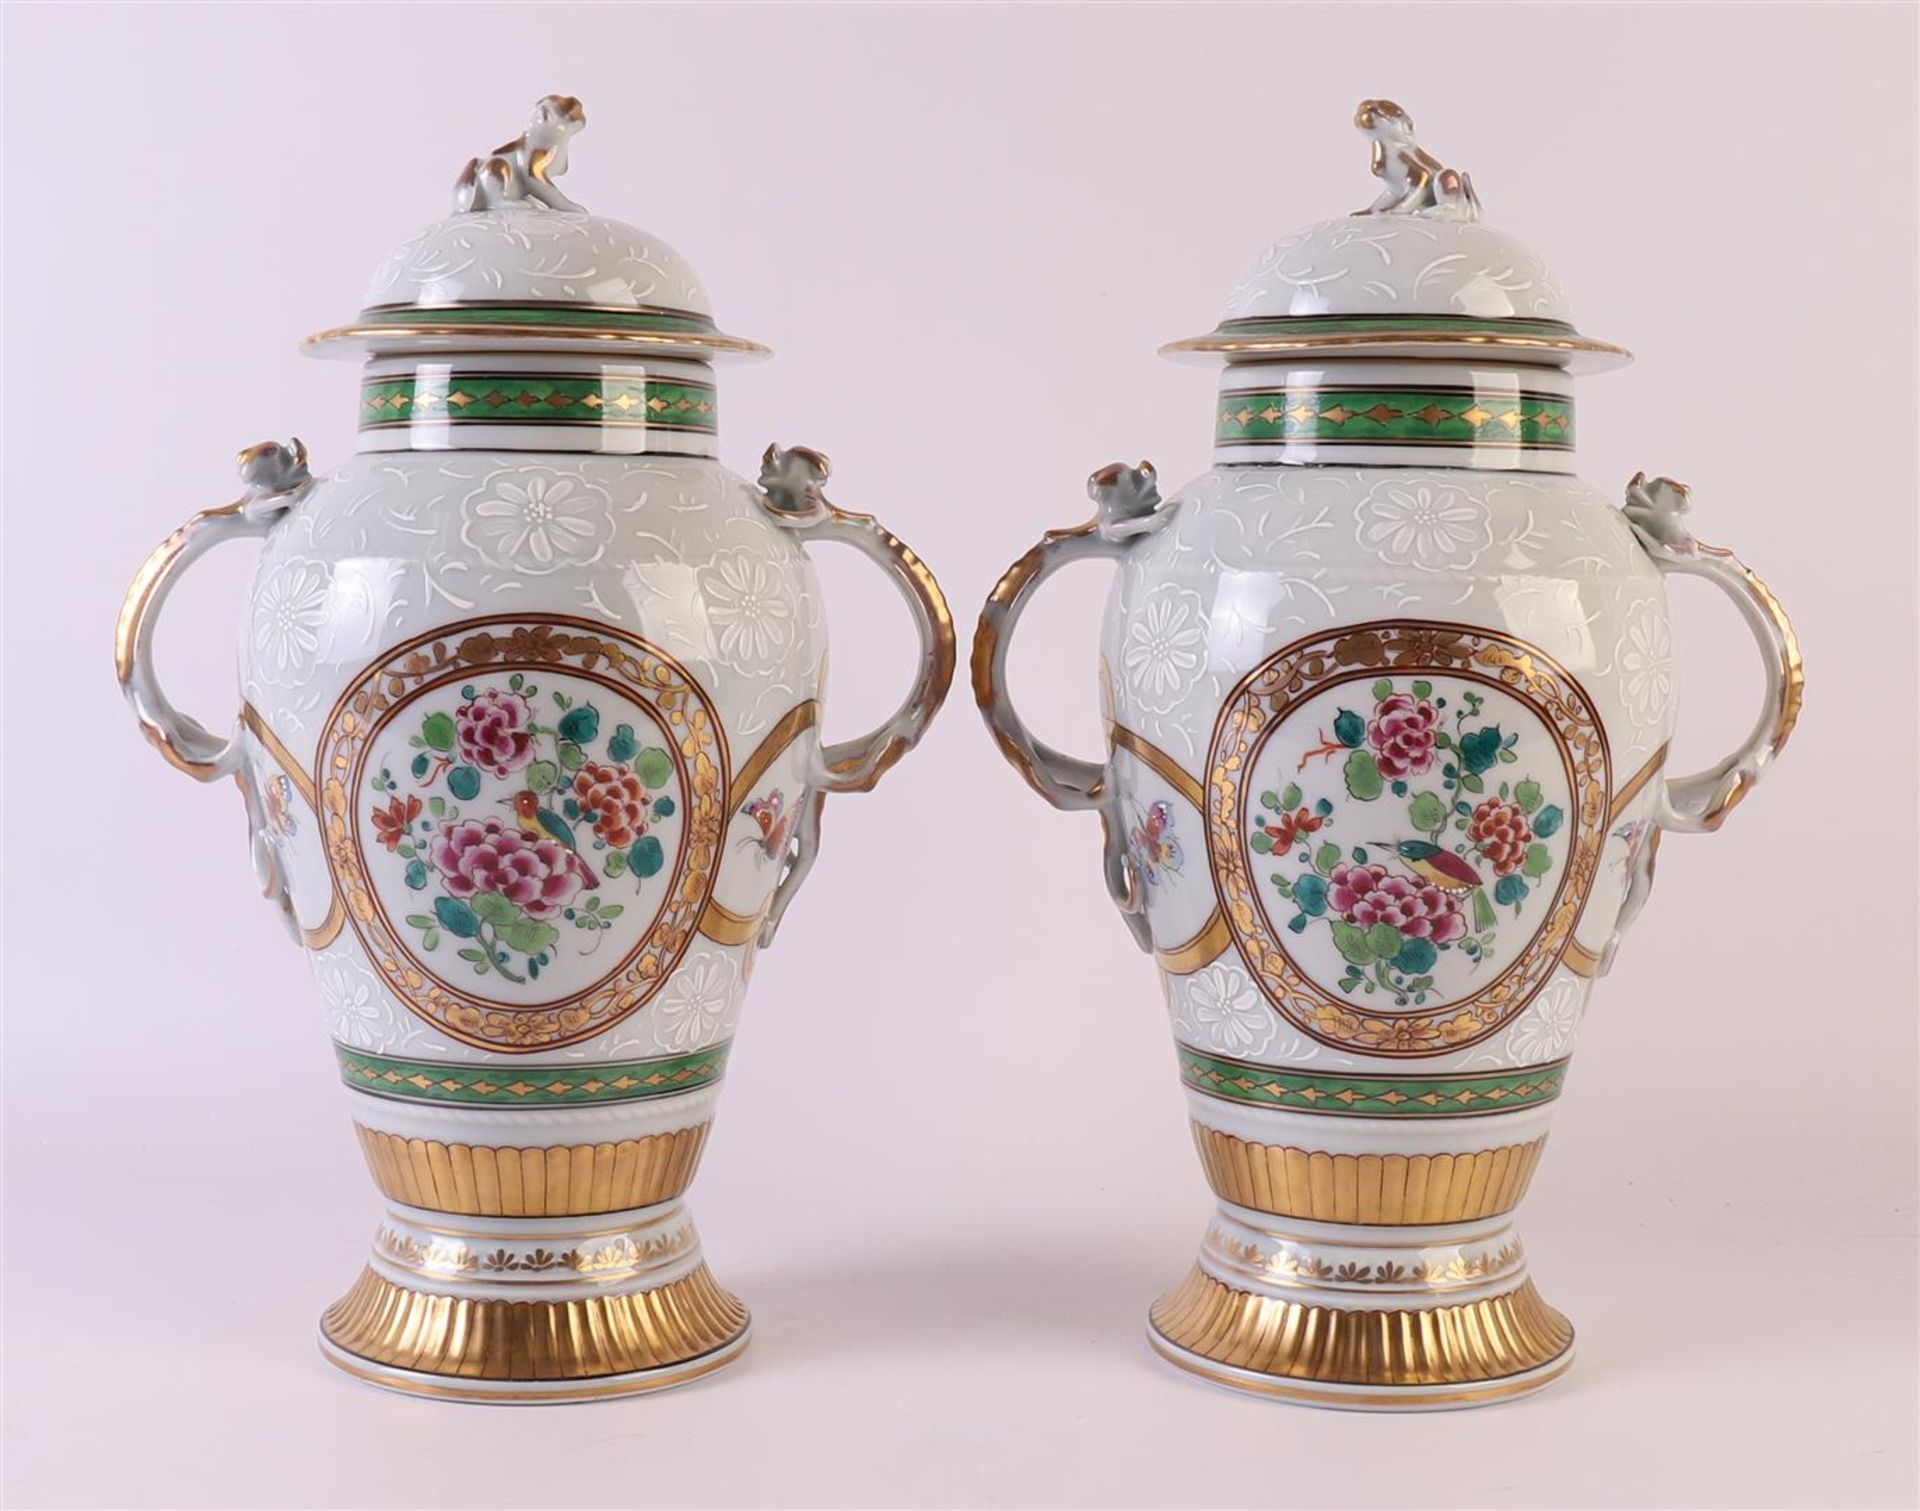 A pair of baluster-shaped porcelain lidded vases with salamanders as ears, France, Samson around